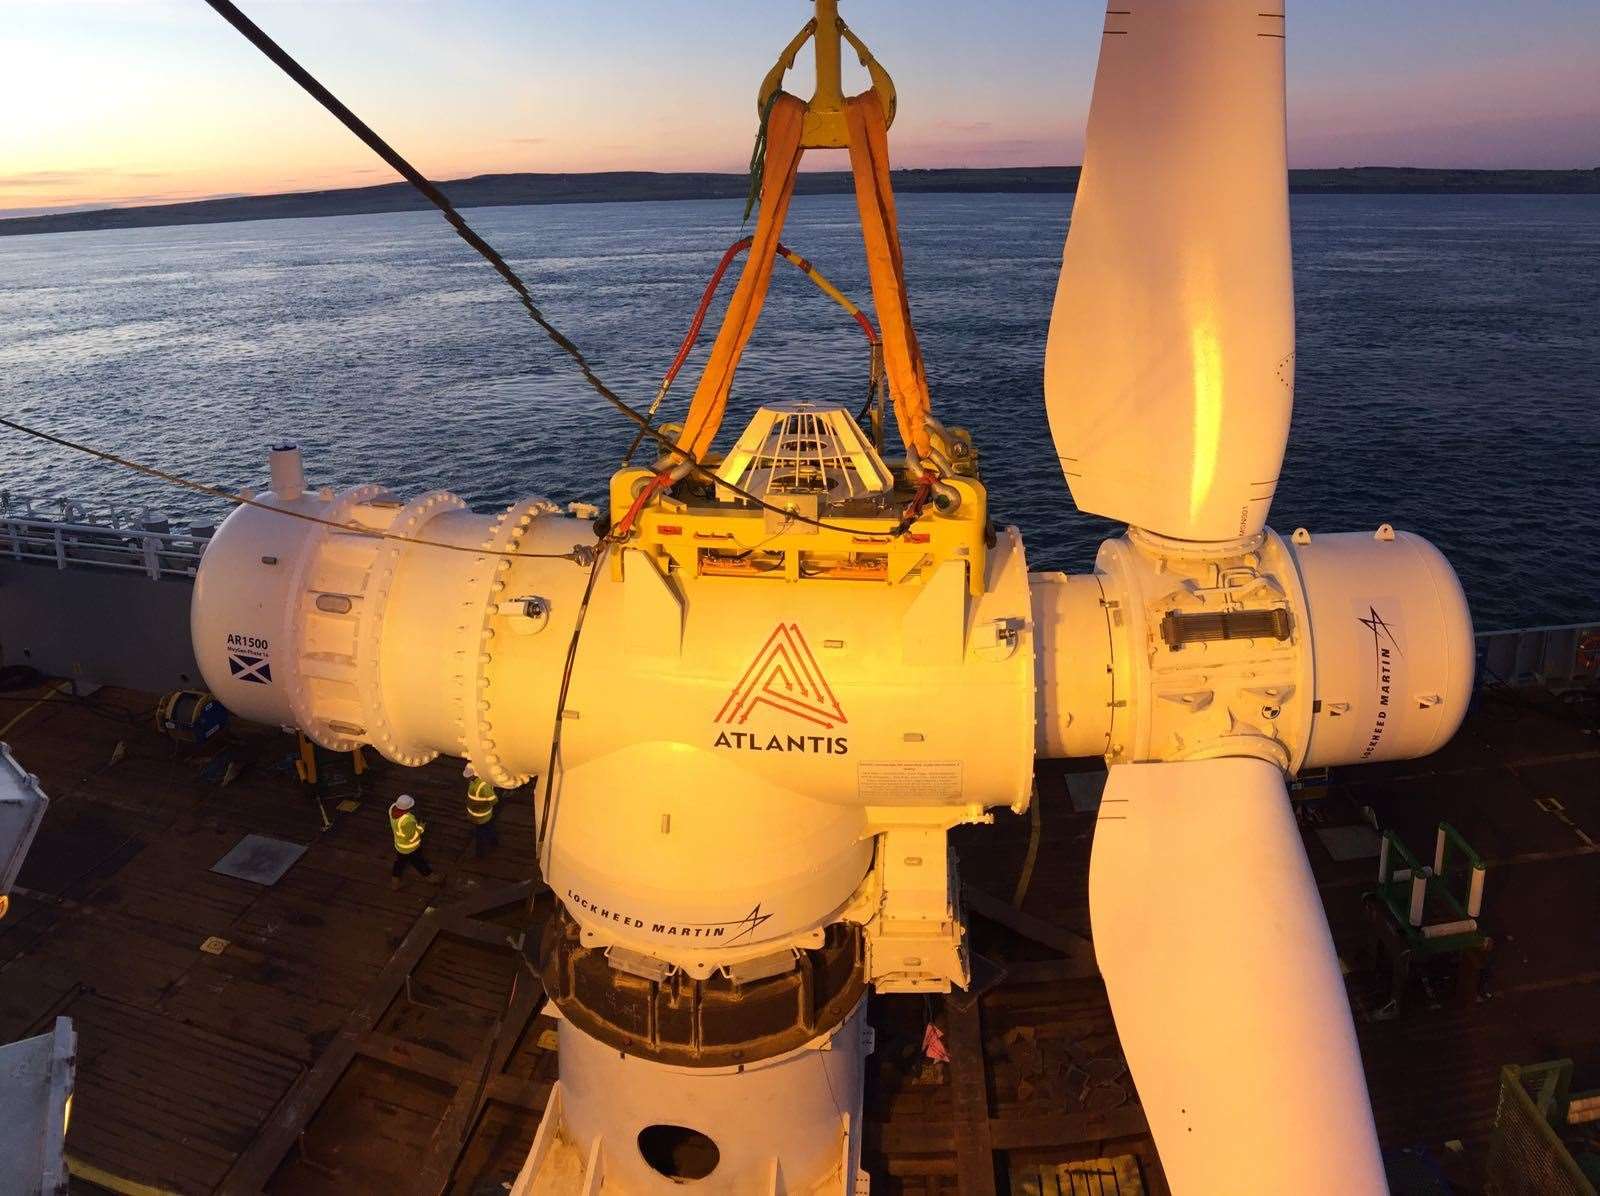 MeyGen has installed four demonstration arrays in the Pentland Firth